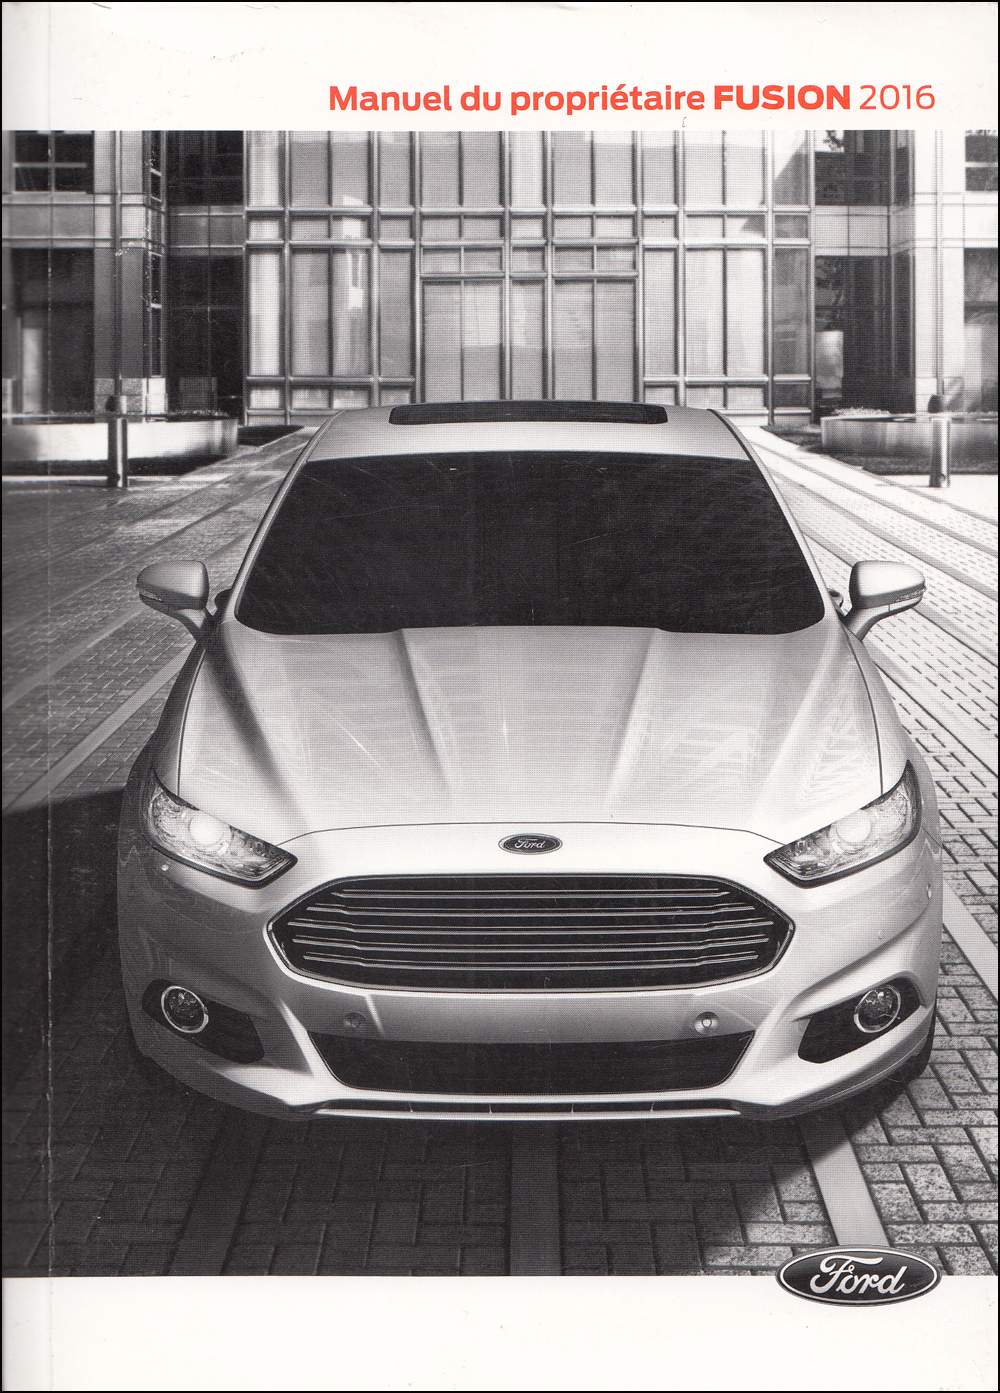 2016 Ford Fusion Owner's Manual Original FRENCH language Canada